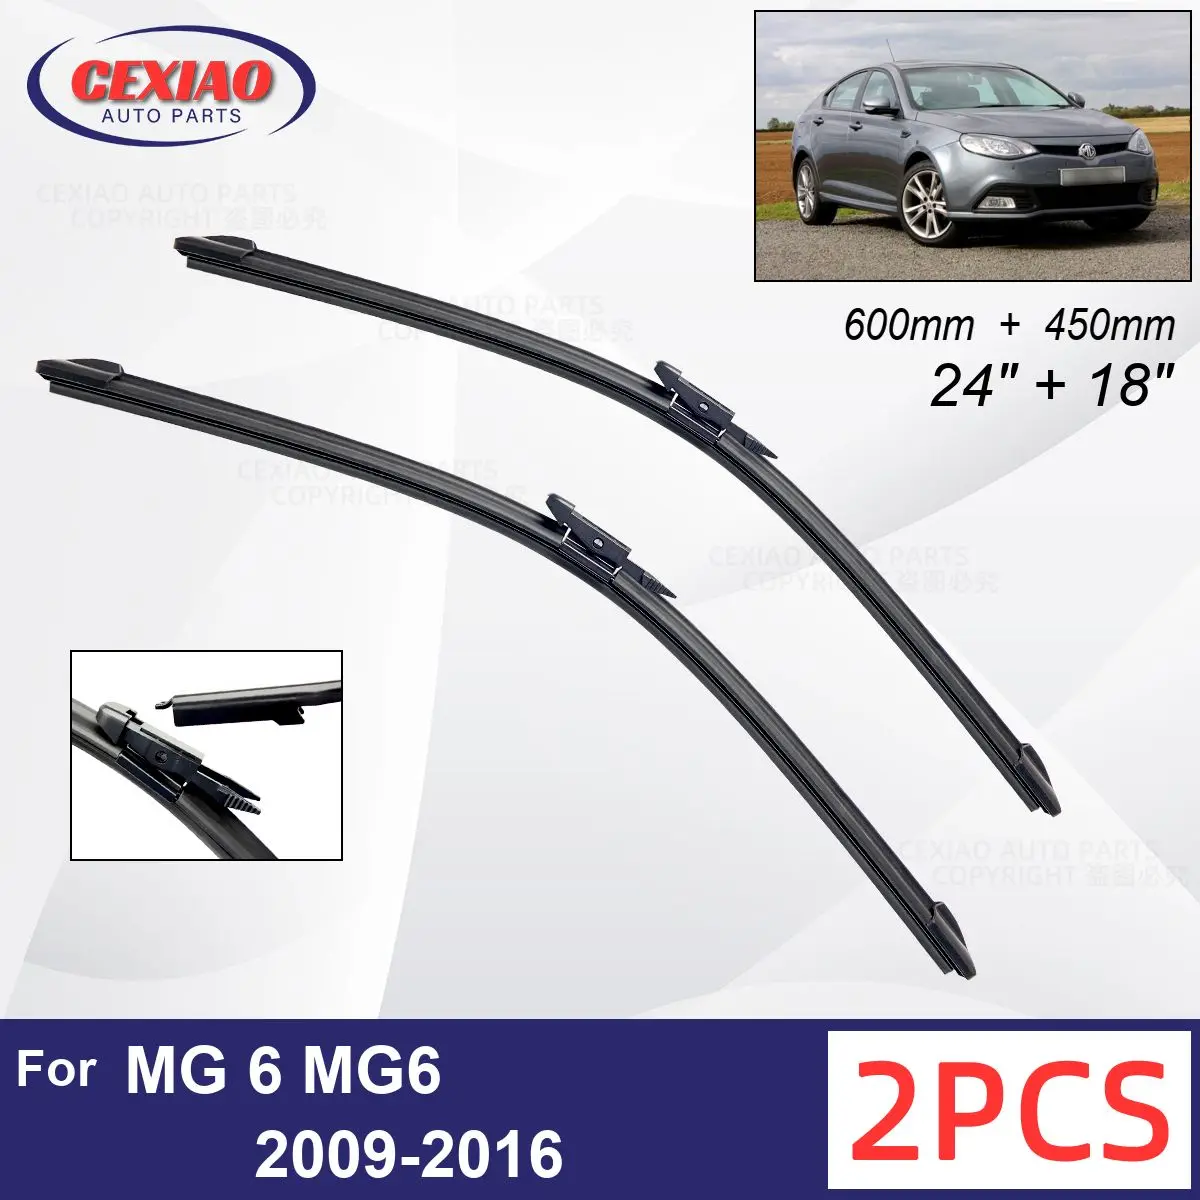 

Car Wiper For MG 6 MG6 2009-2016 Front Wiper Blades Soft Rubber Windscreen Wipers Auto Windshield 24" 18" 600mm 450mm